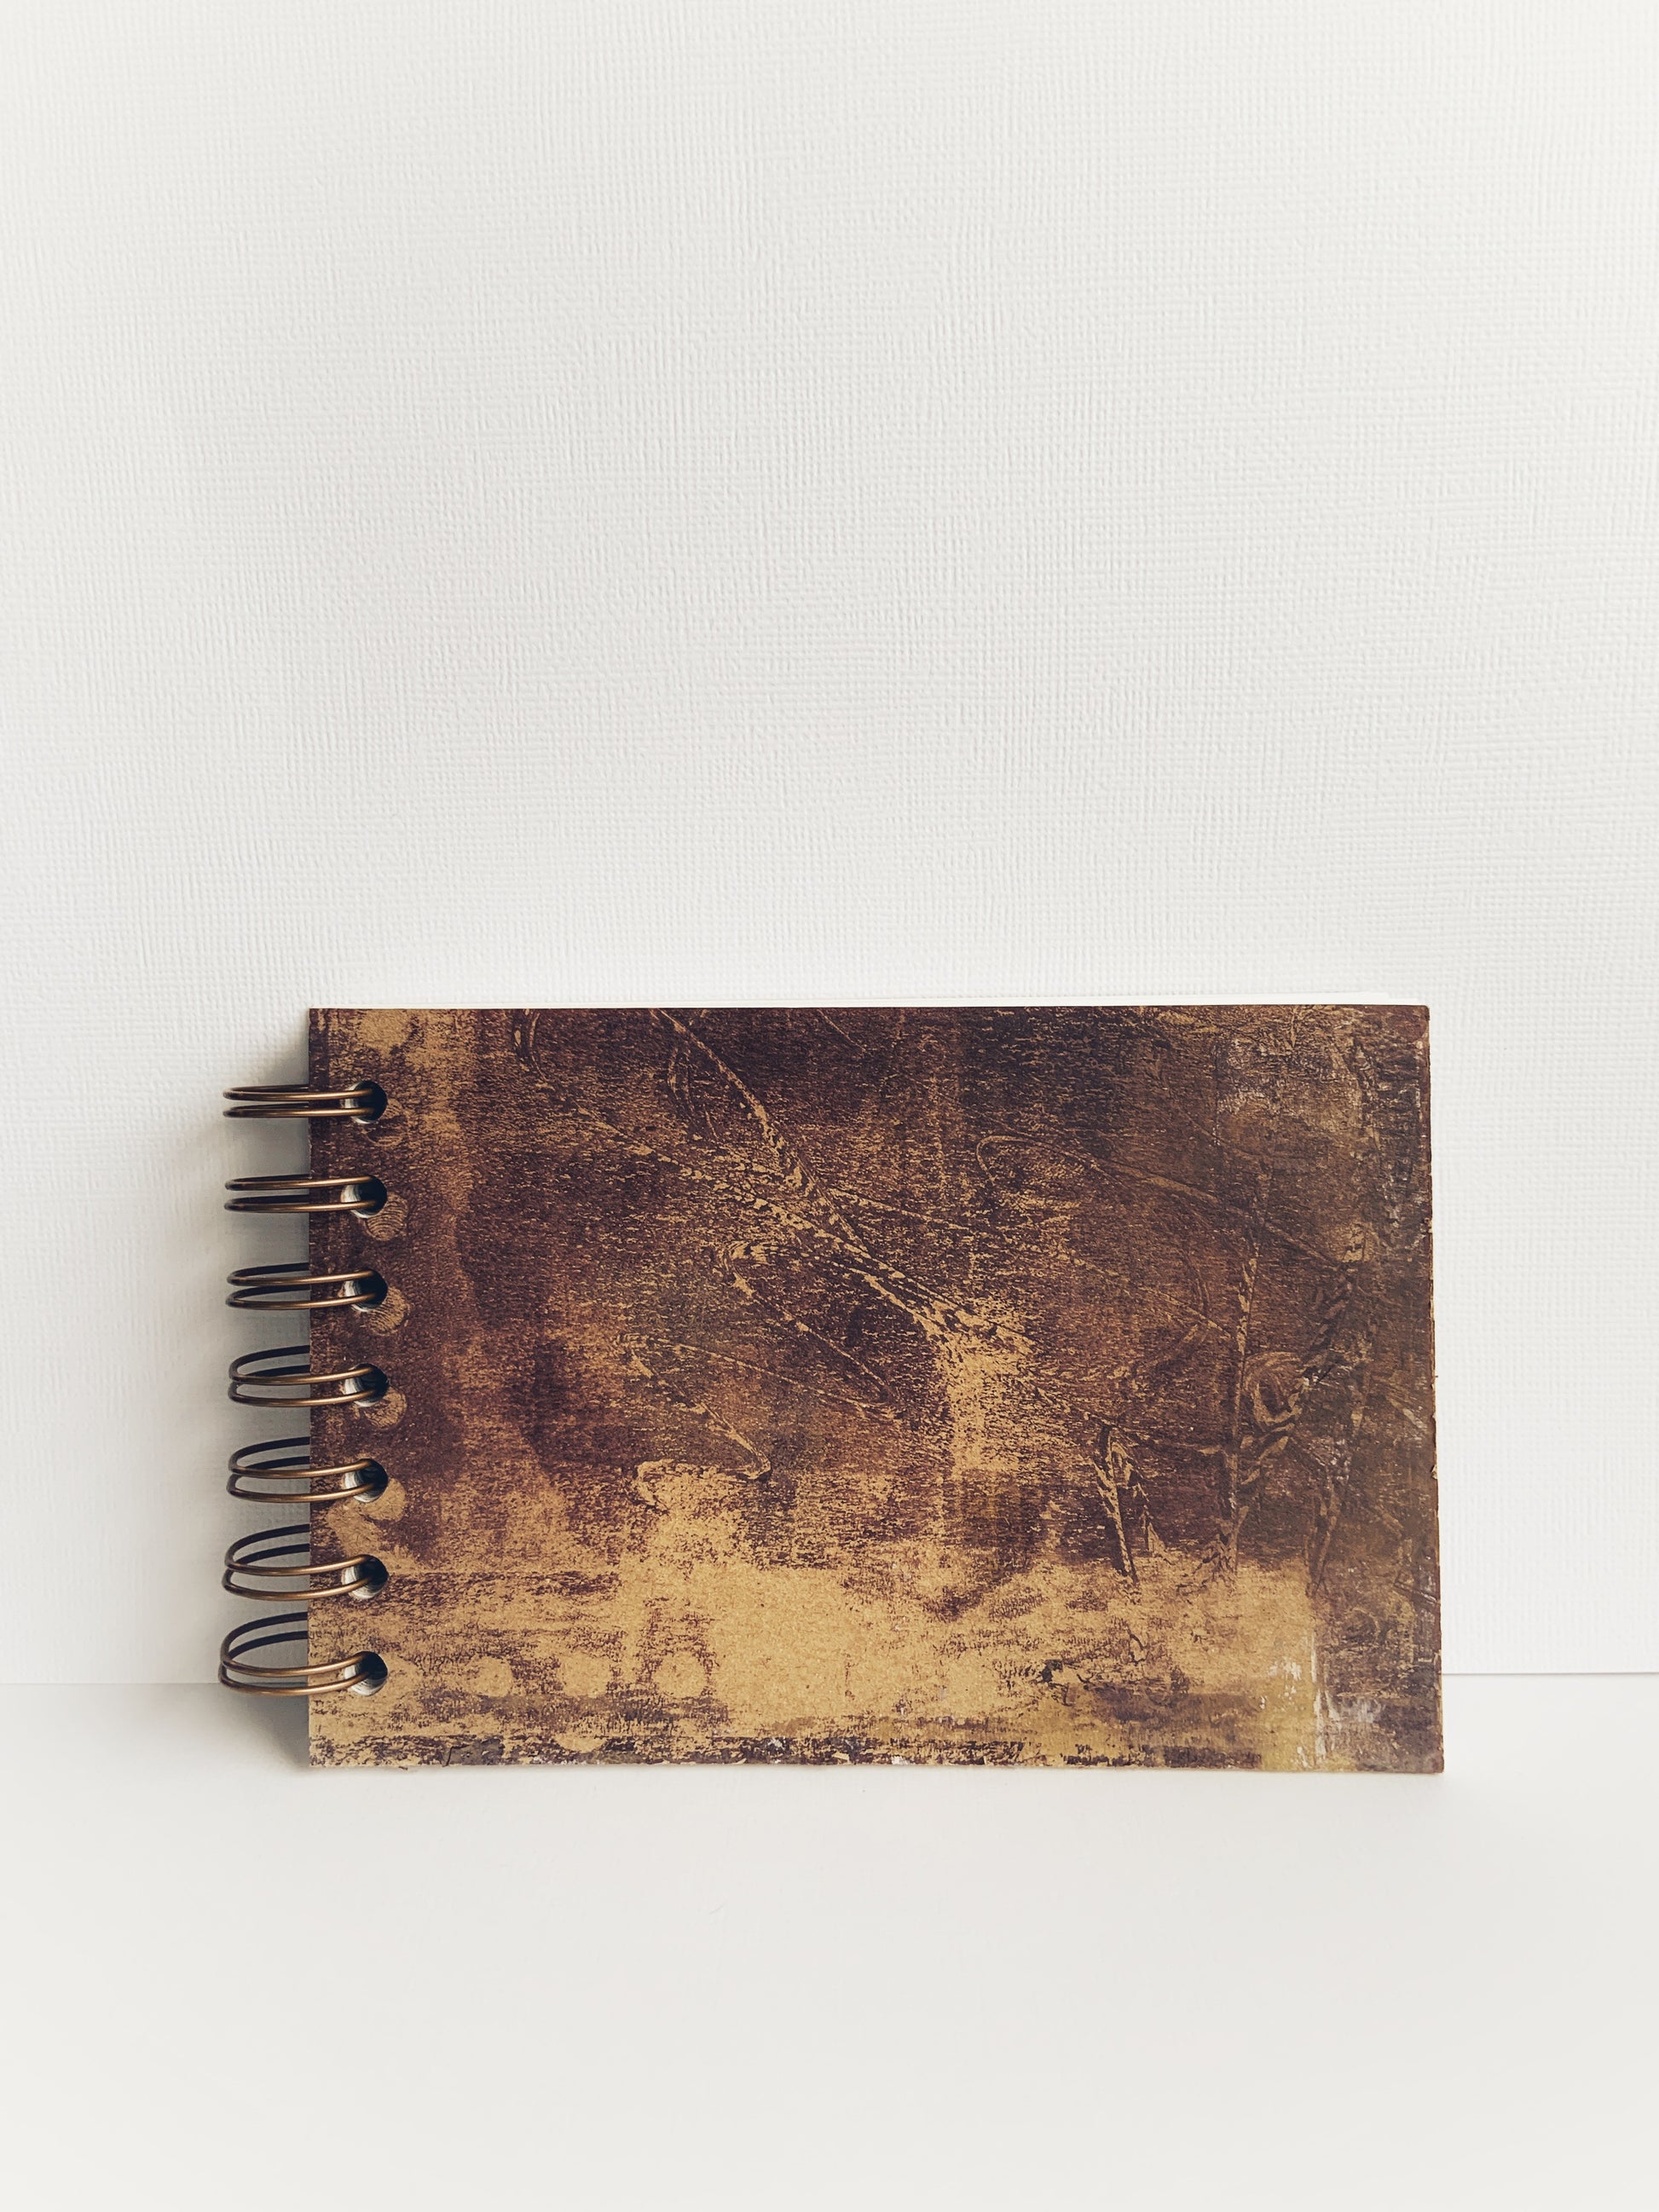 Front cover of a handmade journal in shades of brown that gives it a leather look